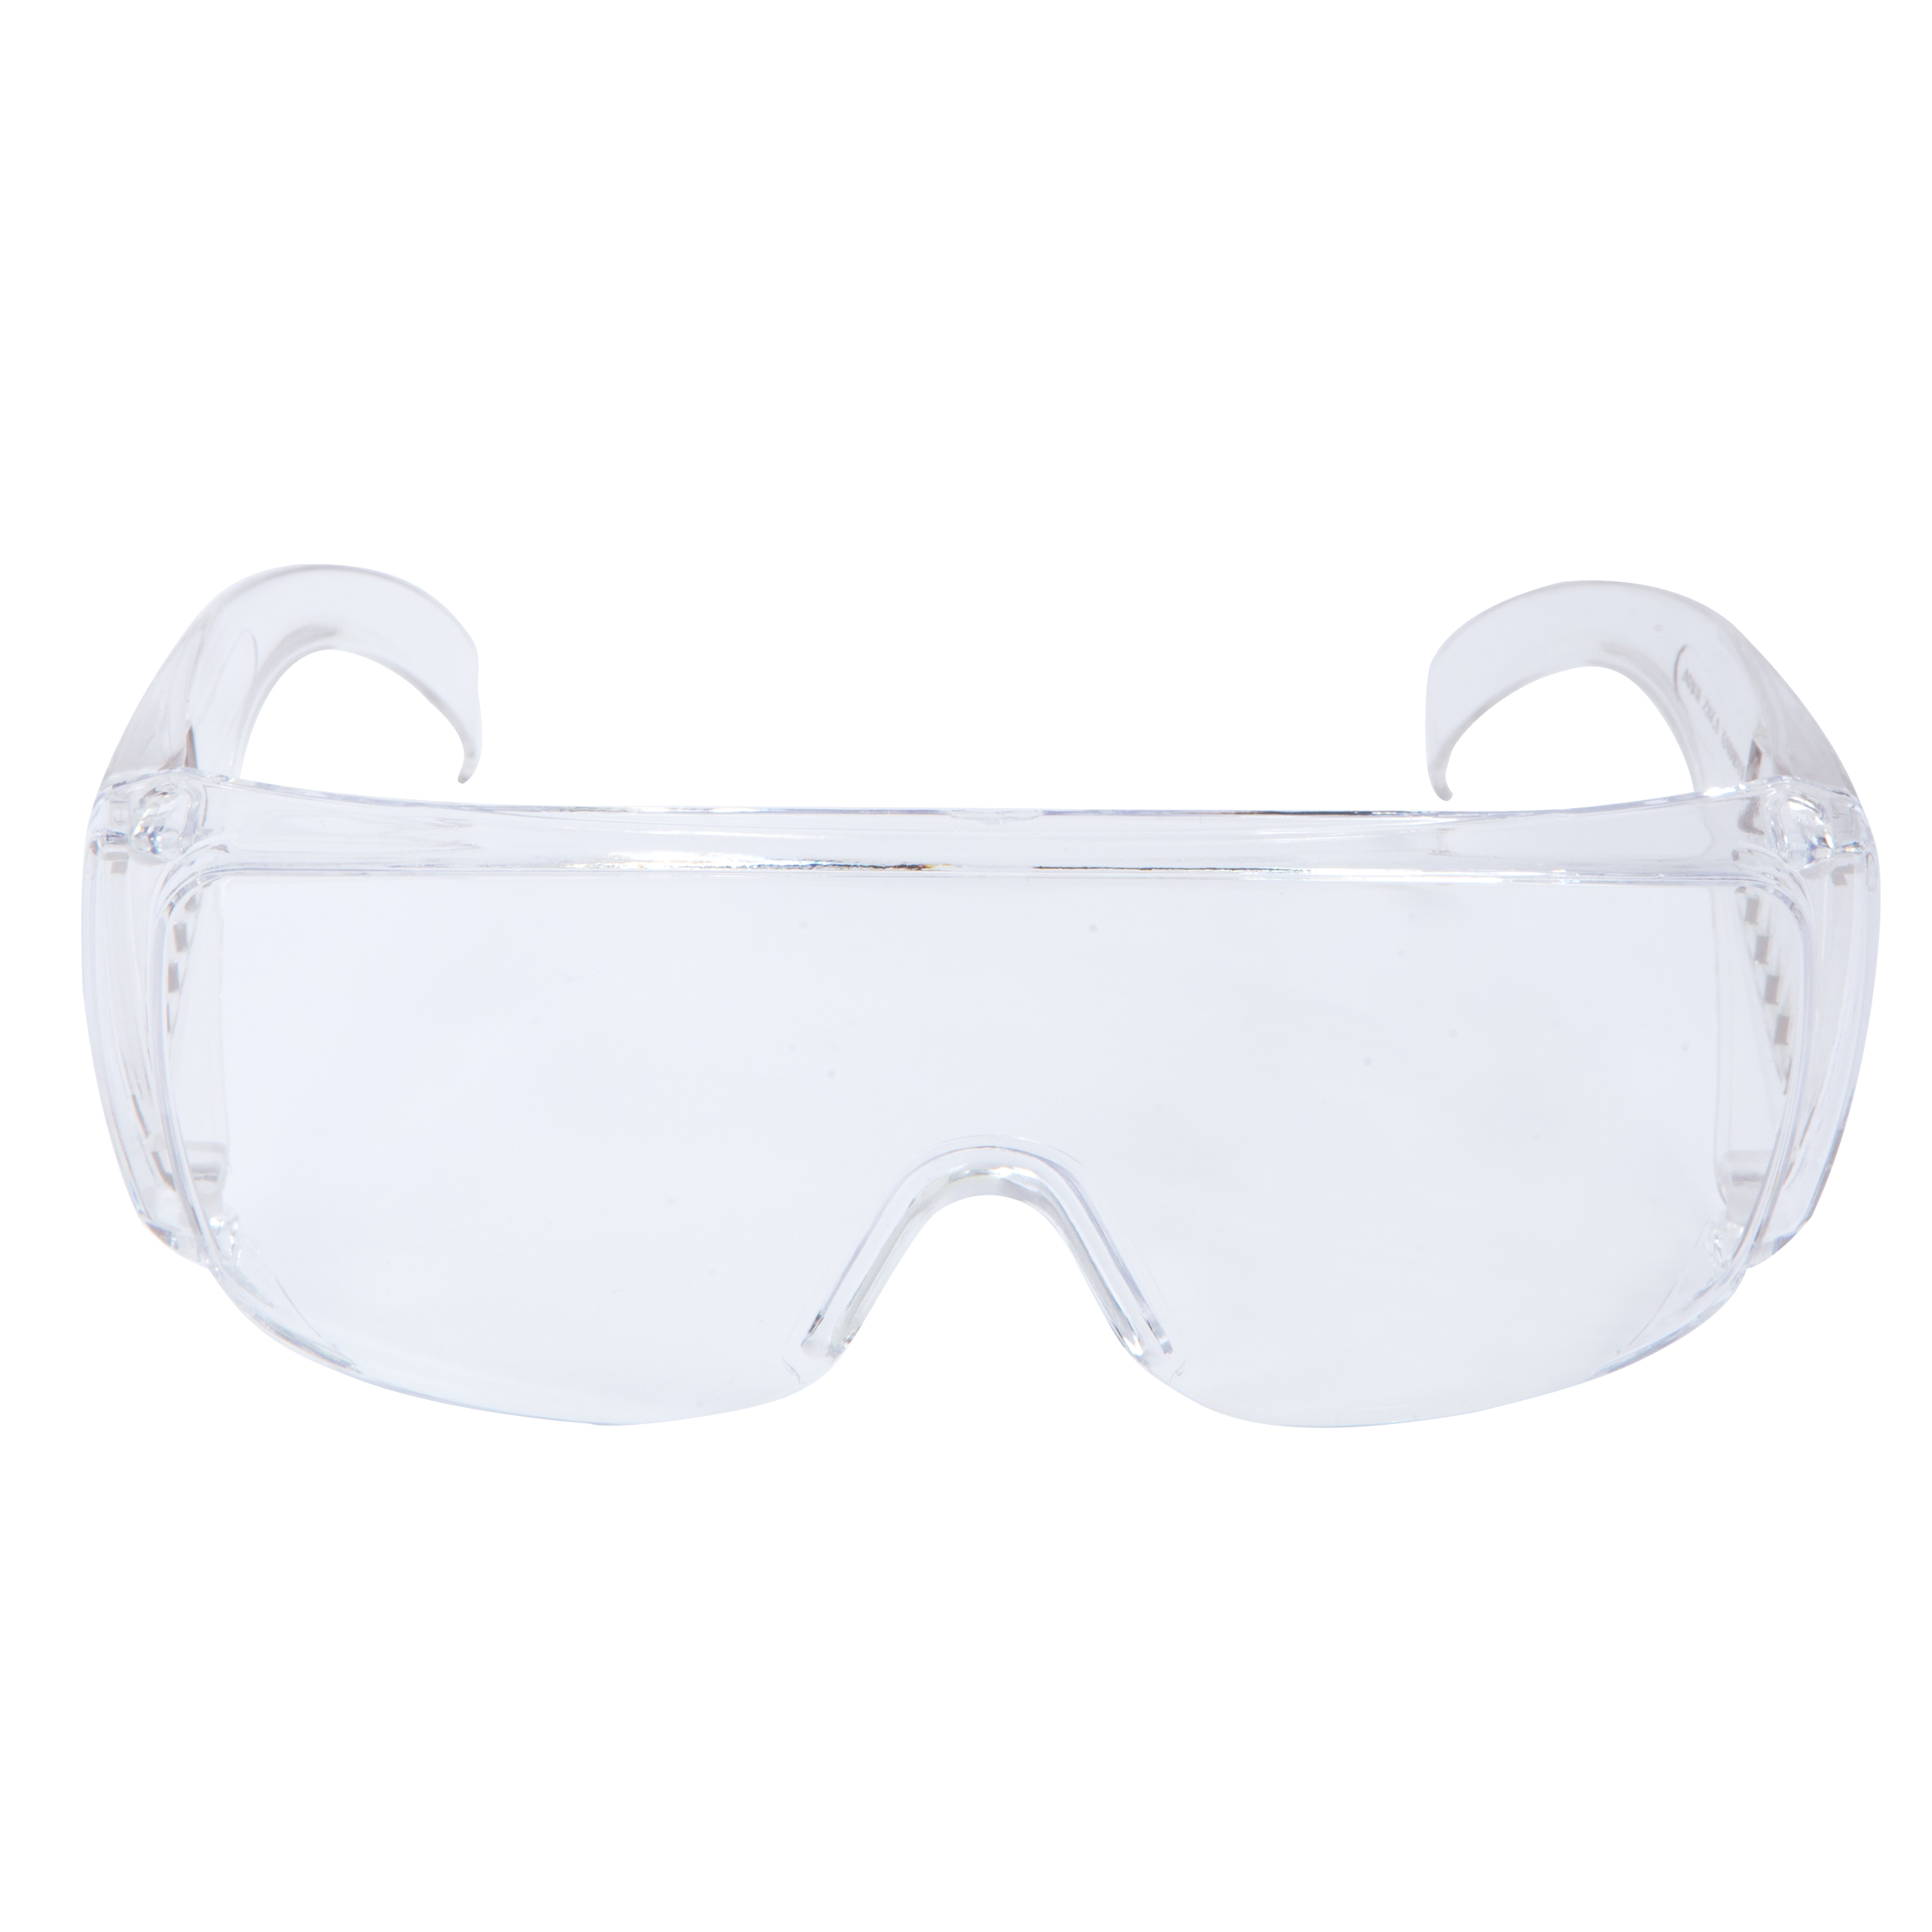 Industrial Use Funny Safety Glasses Safety Glasses 